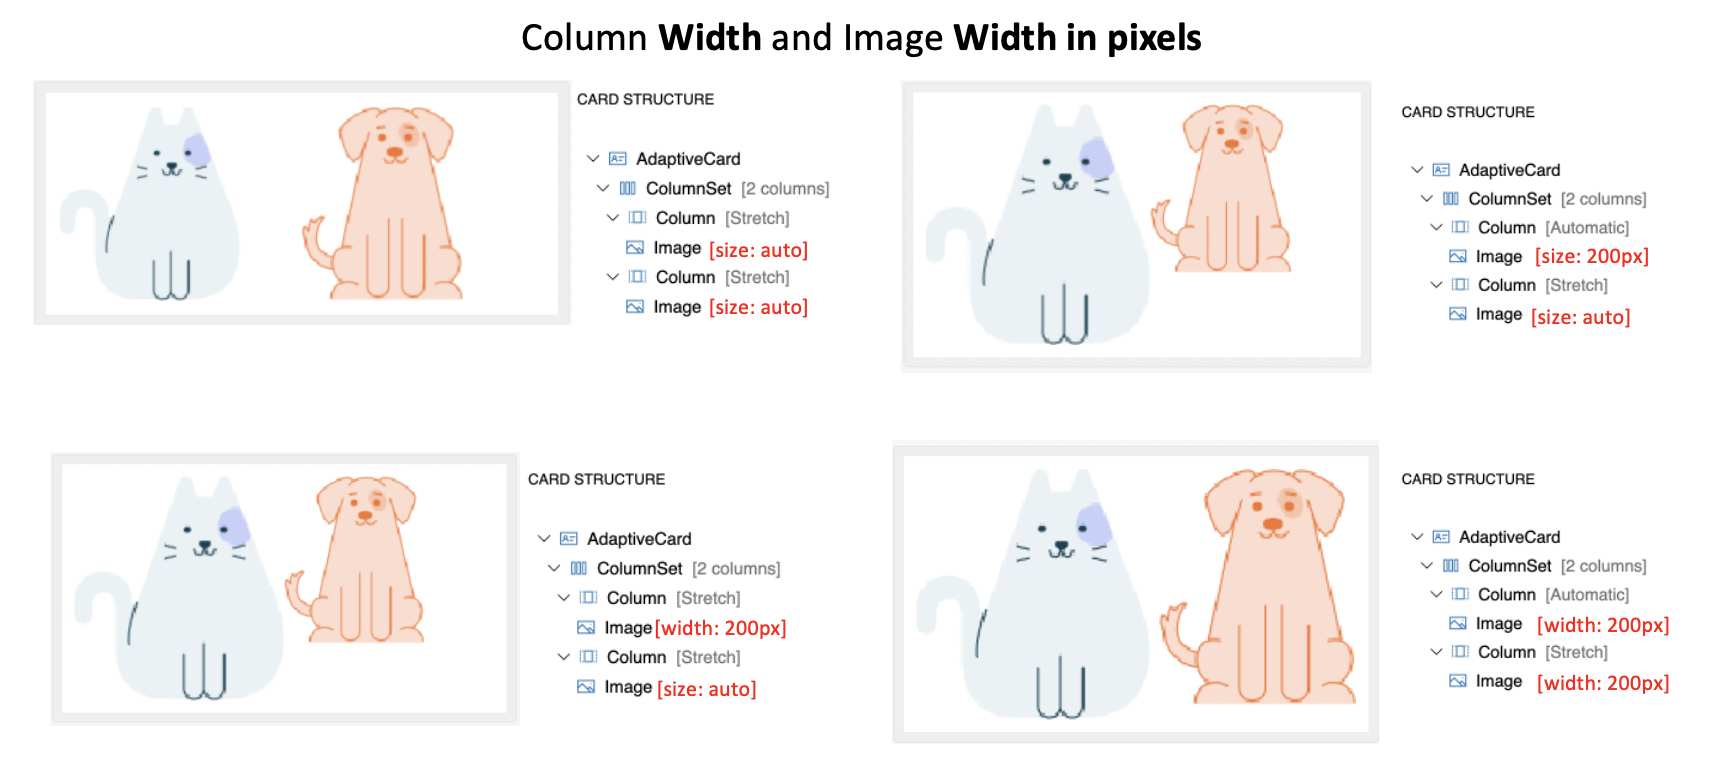 Column width and image width in pixels combination